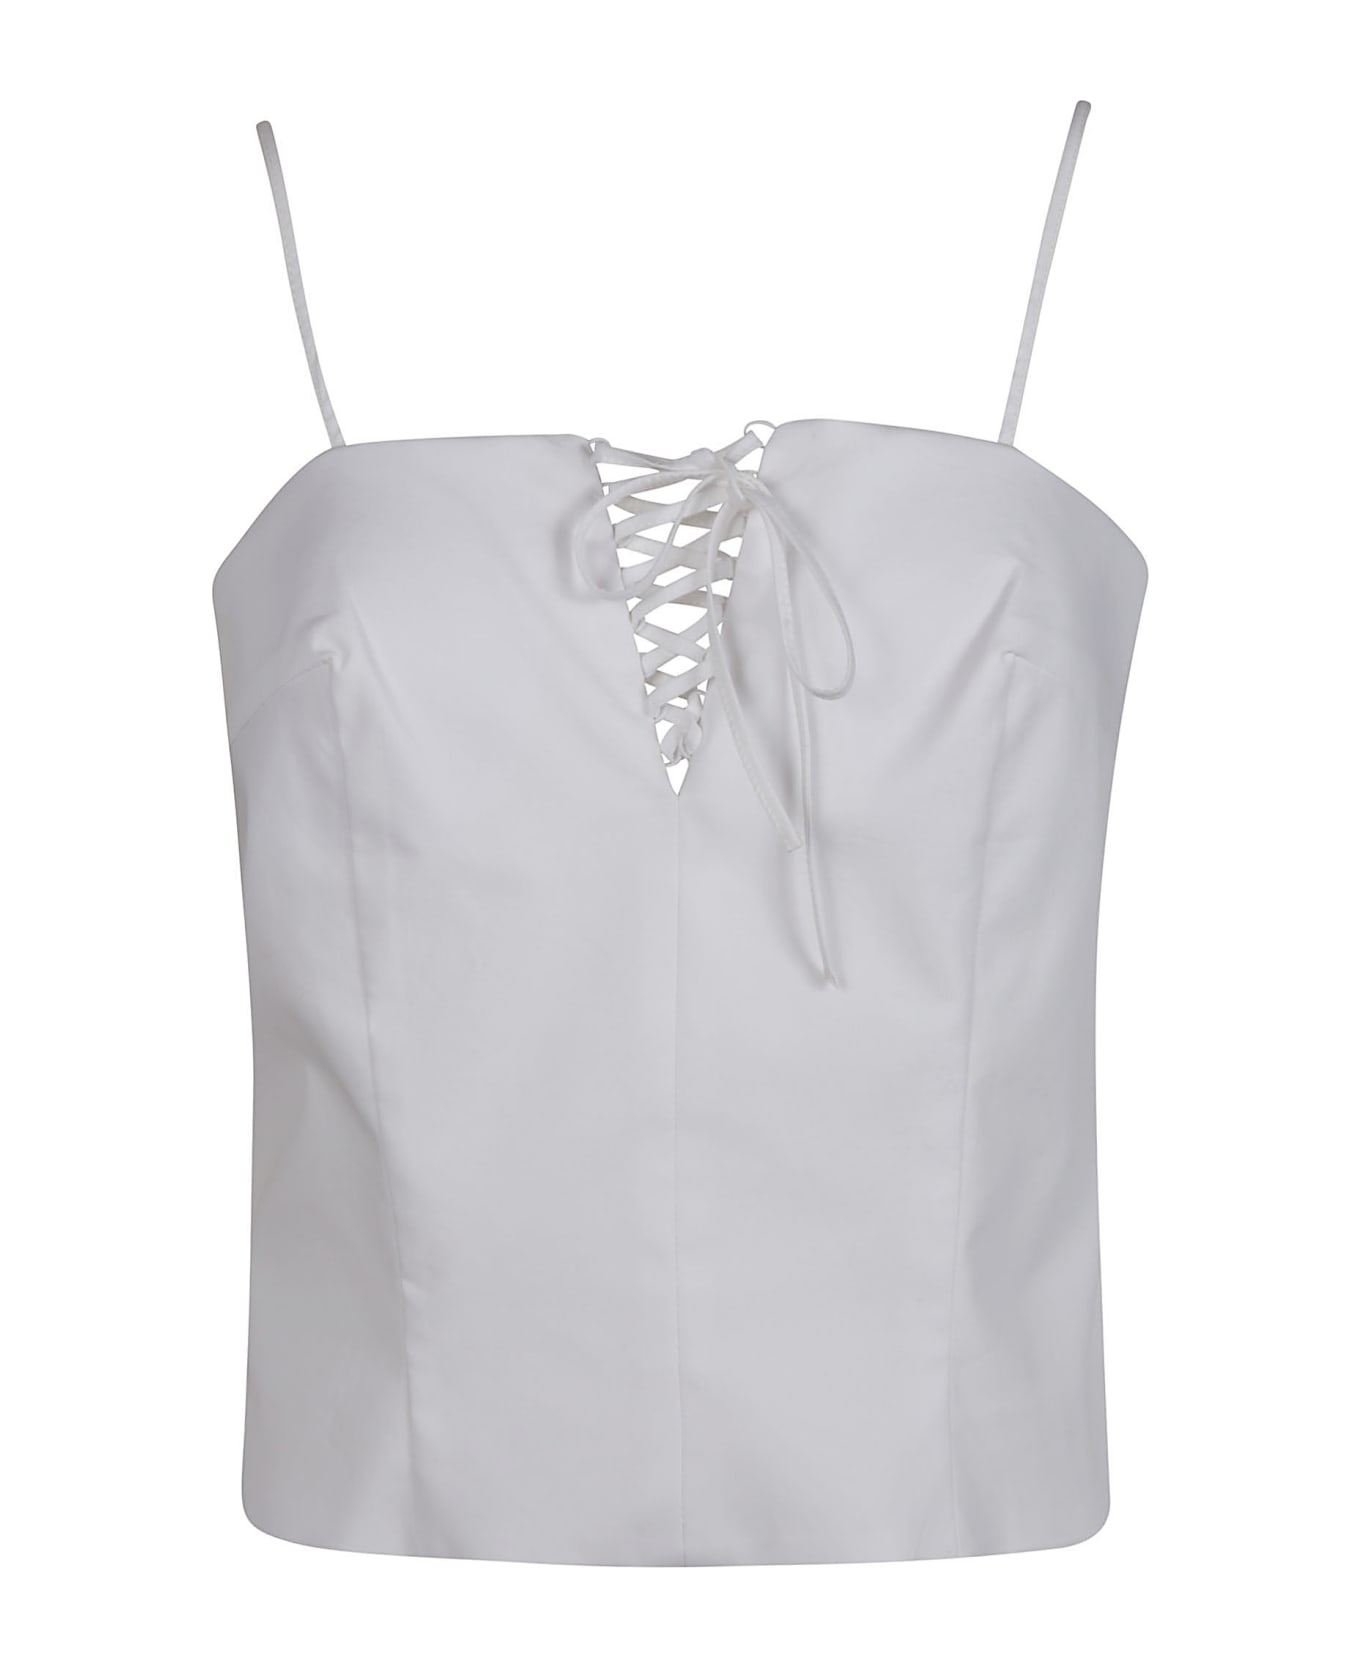 Federica Tosi Lace-up Top - Bianco